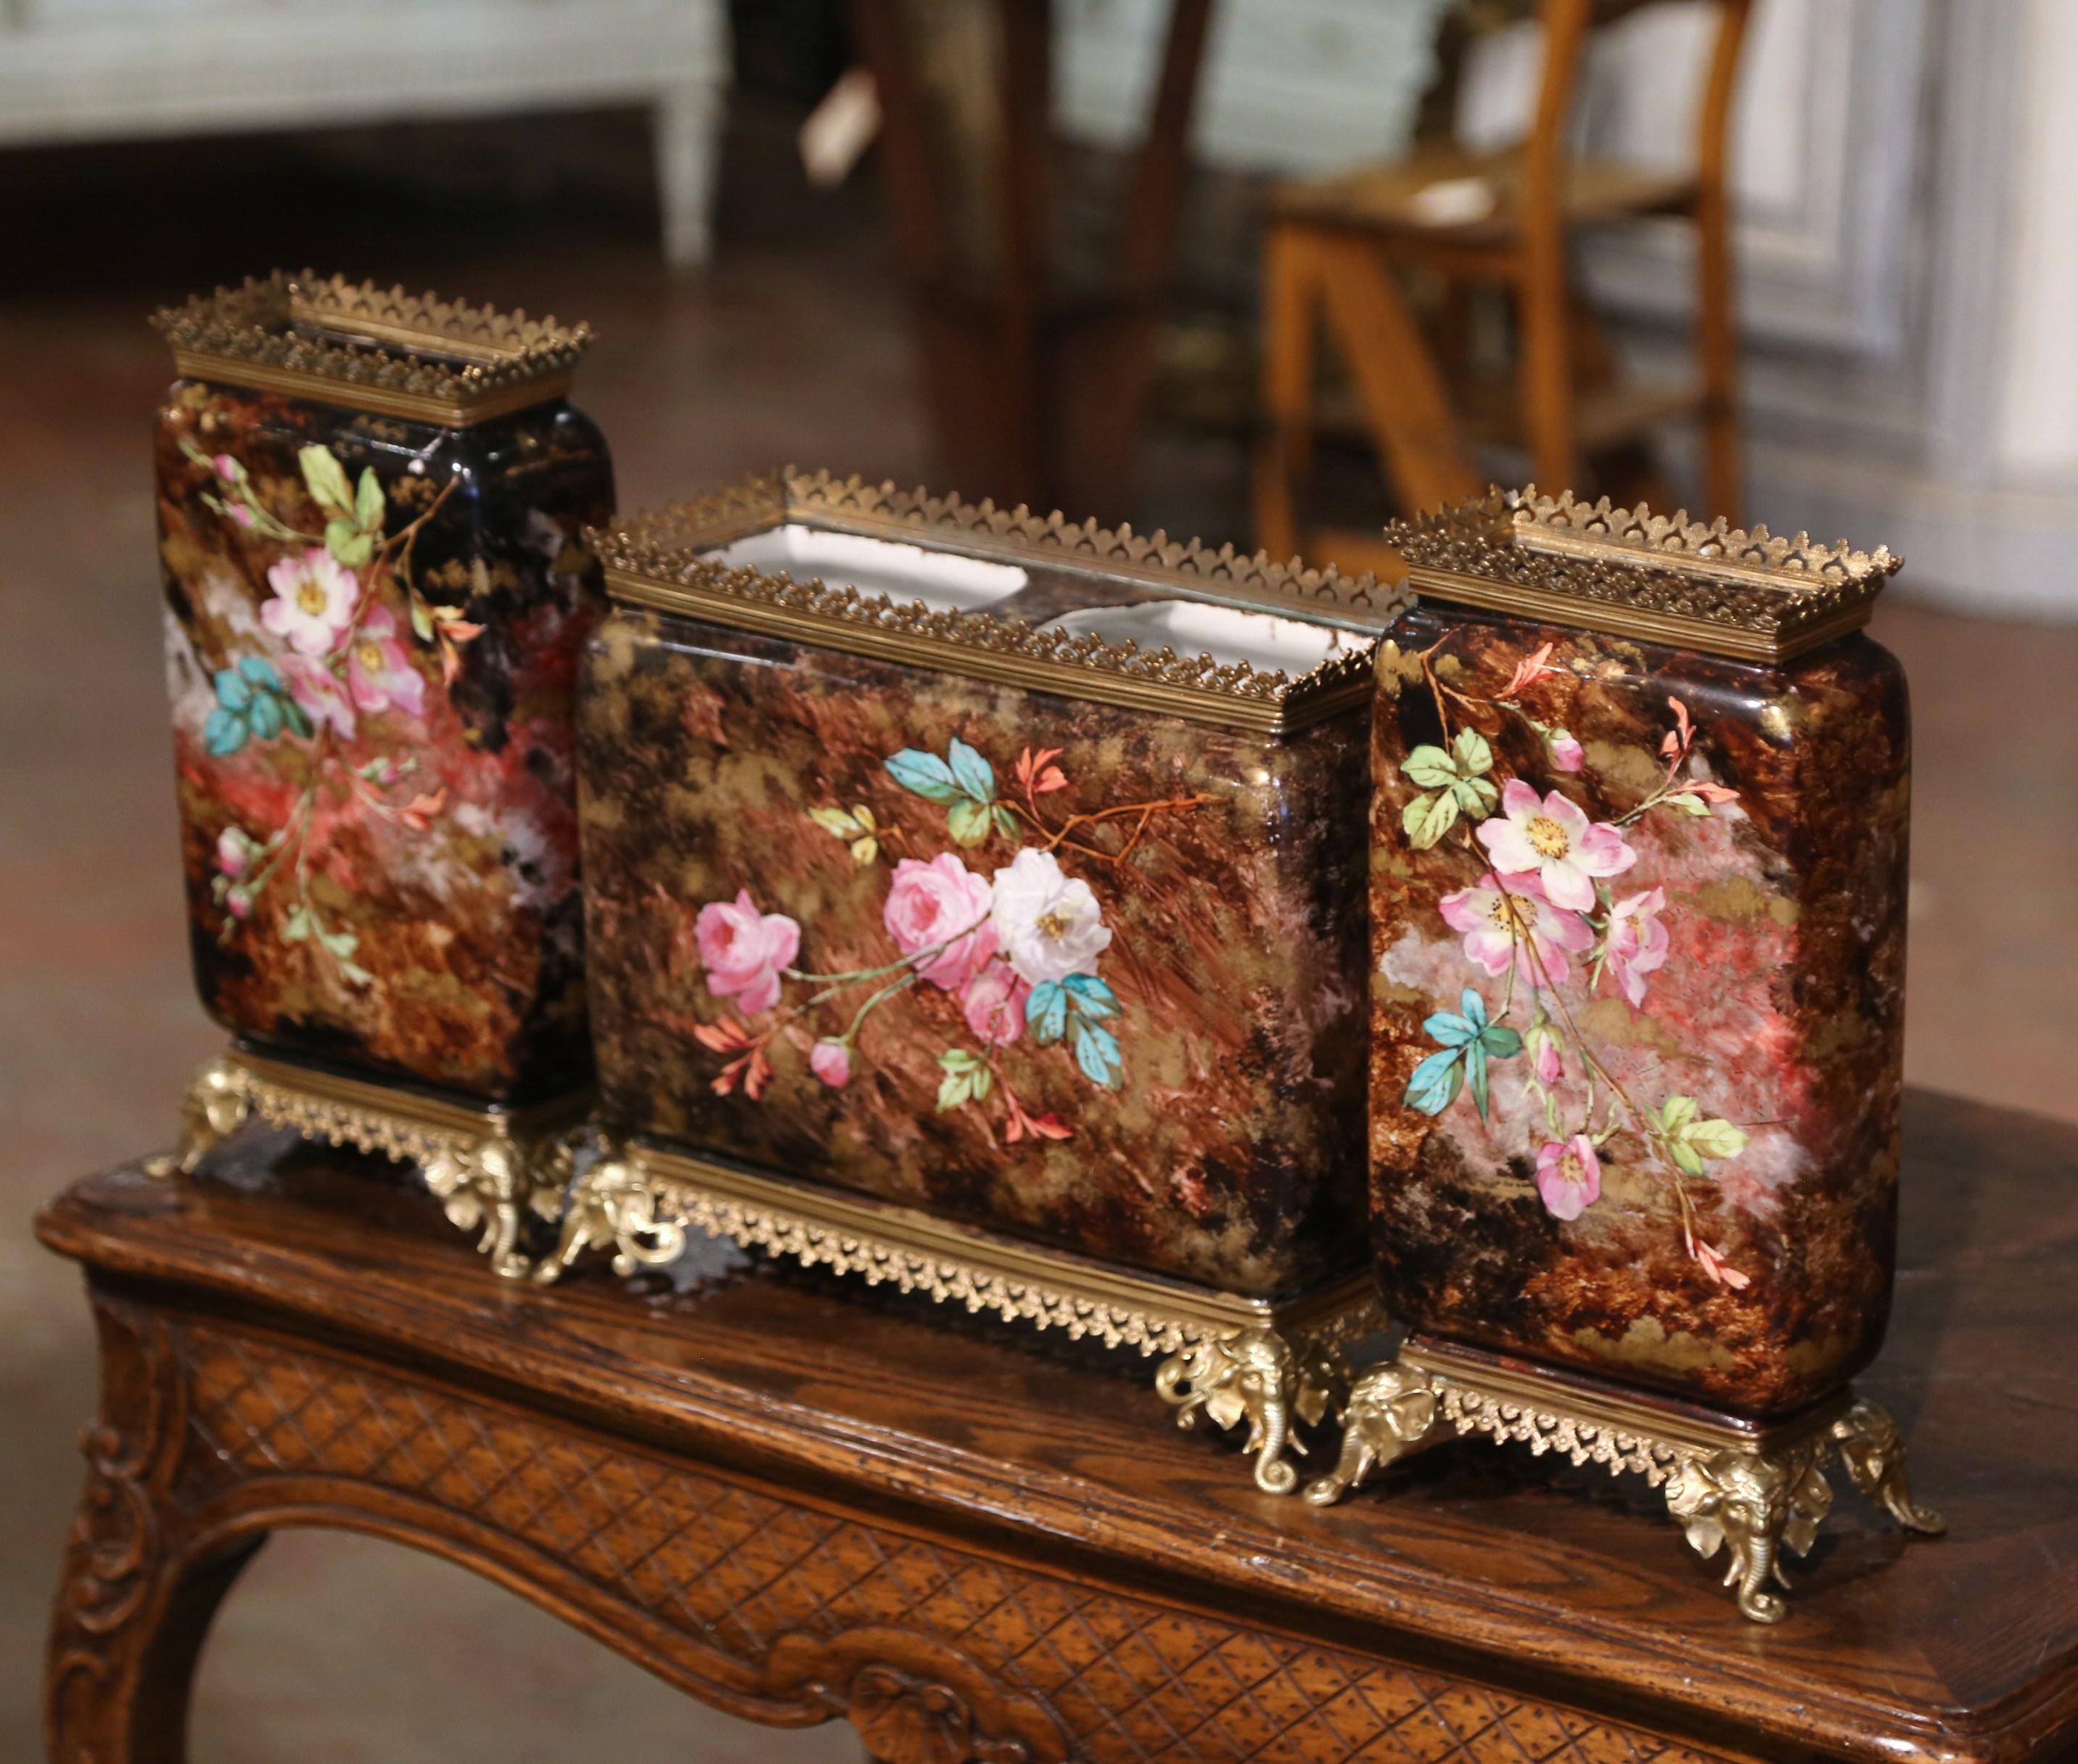  19th Century French Parisian Hand Painted Porcelain and Brass Vases, Set of 3 For Sale 13